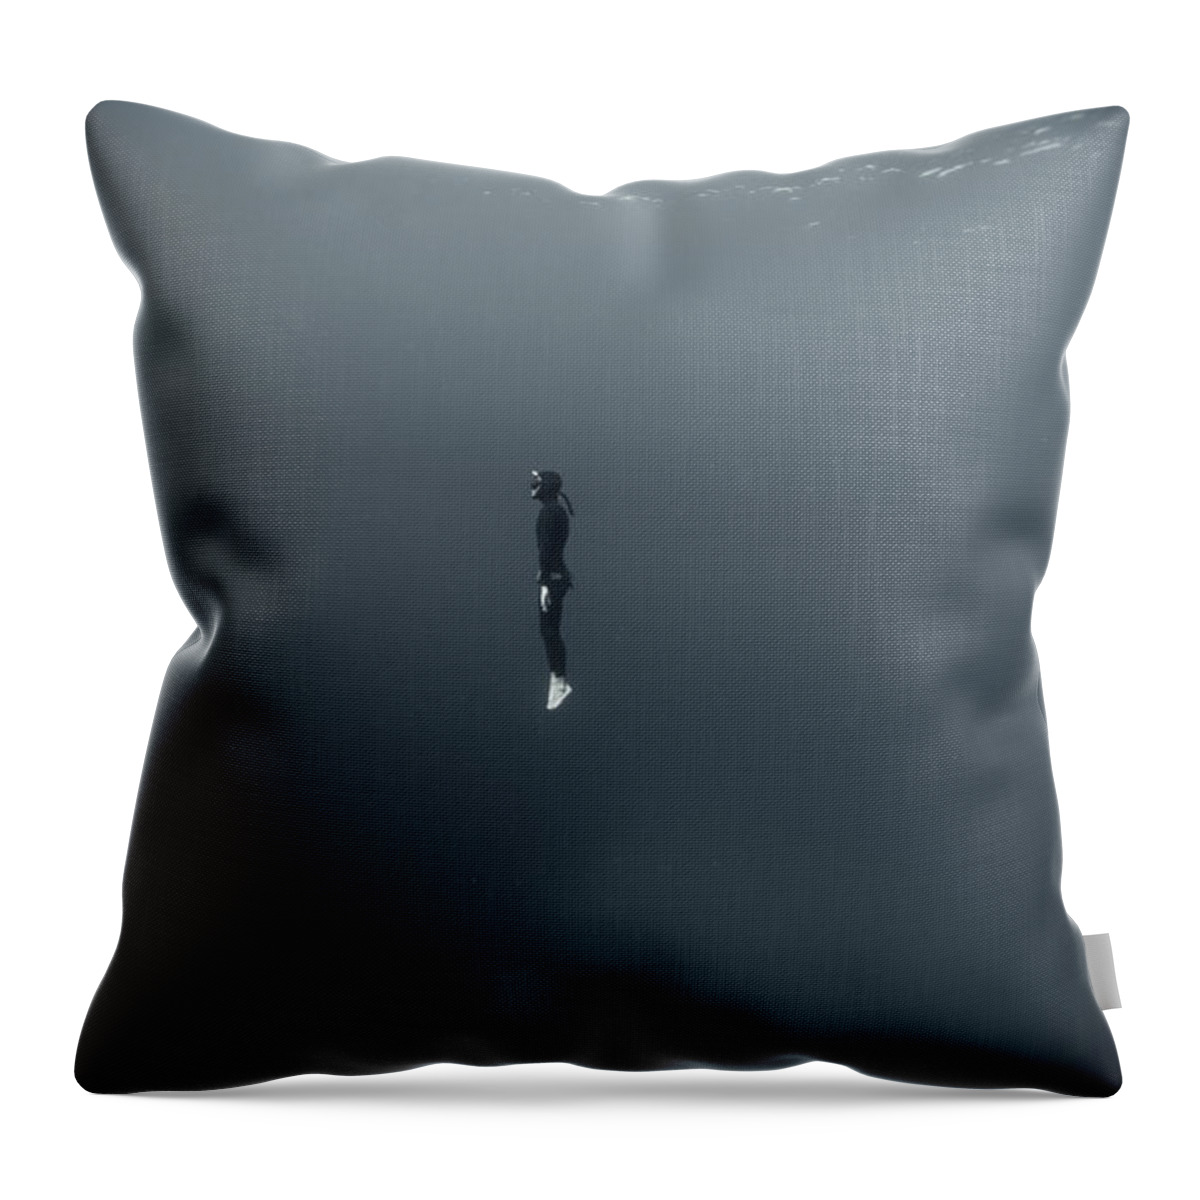 Underwater Throw Pillow featuring the photograph Man In Underwater by Underwater Graphics